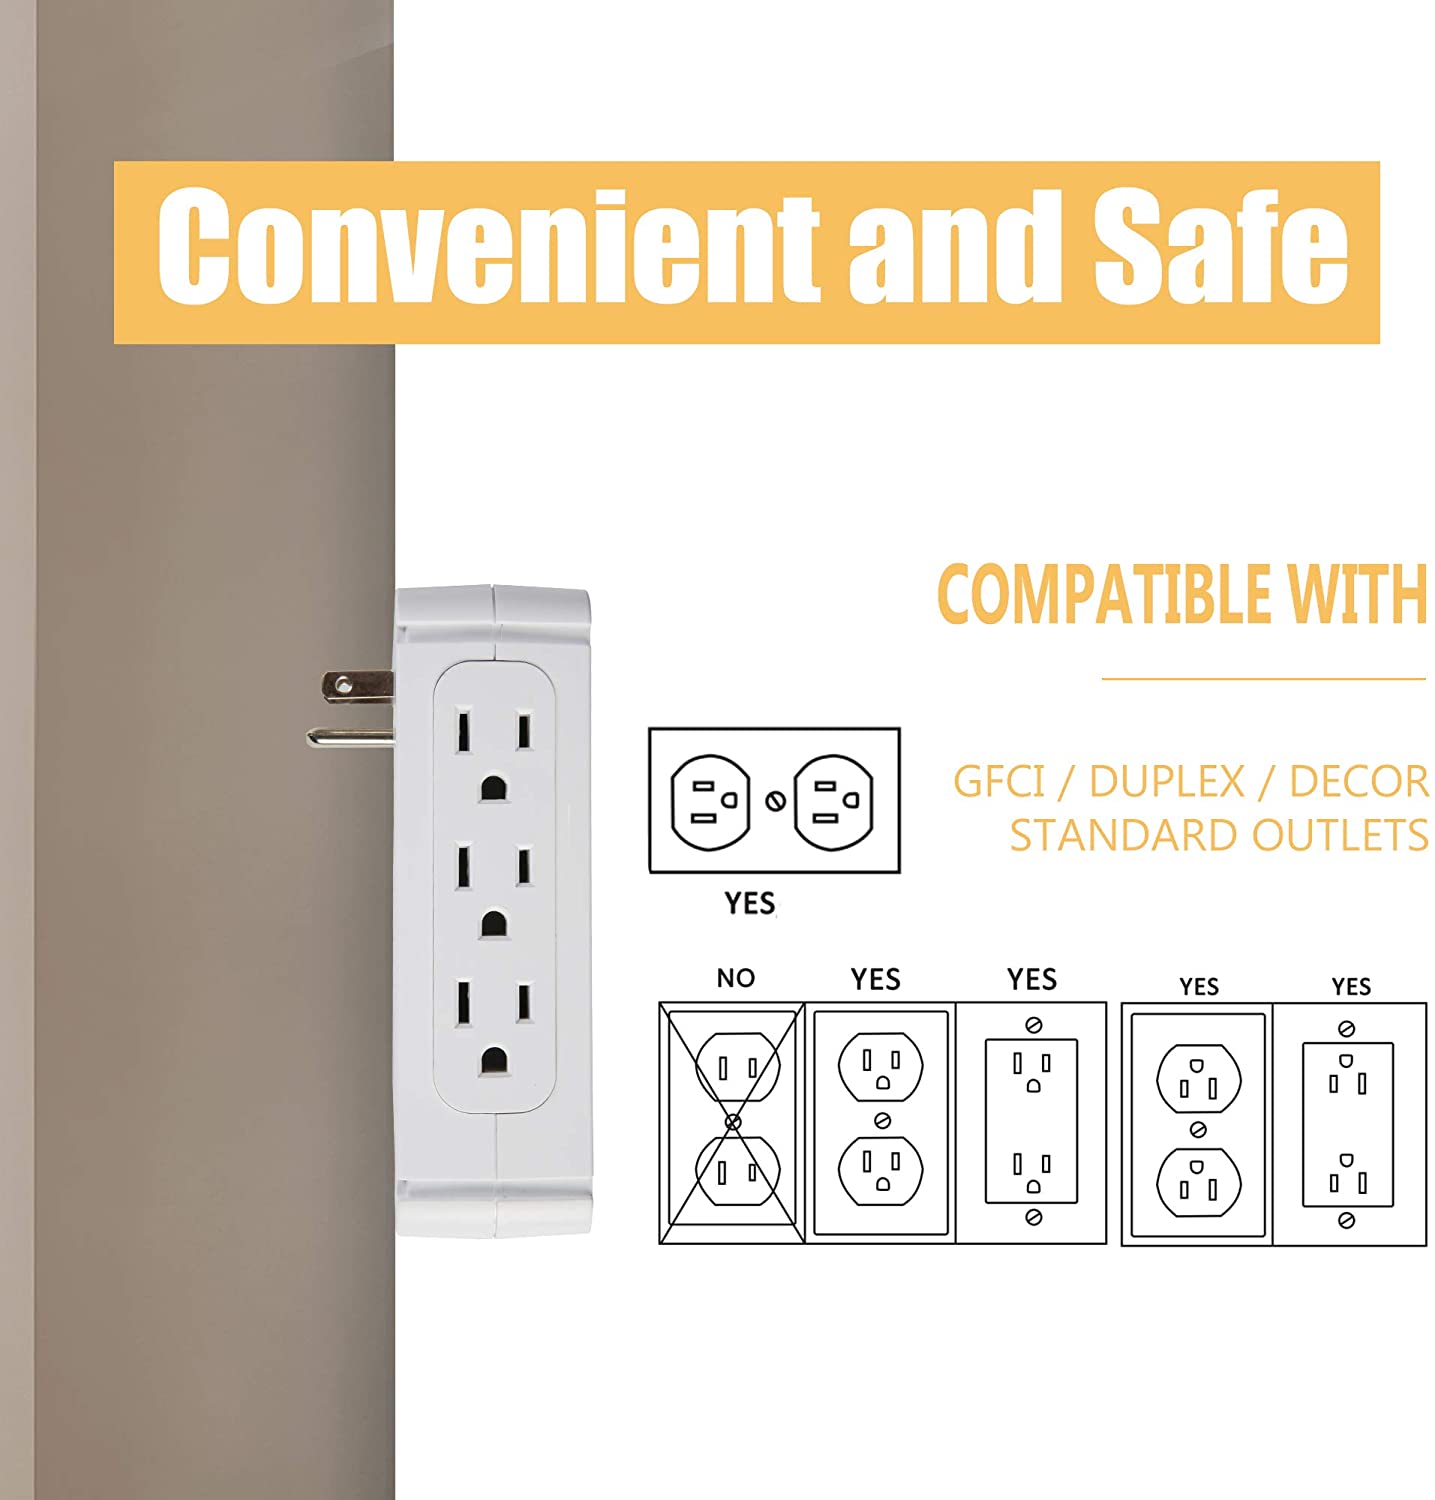 Wall Outlet Extender-2 Pack Surge Protector Multifunctional Outlet Wall Plug with 3 USB Ports(3.4A Total), 8 AC Outlets, Removable Outlet Shelf